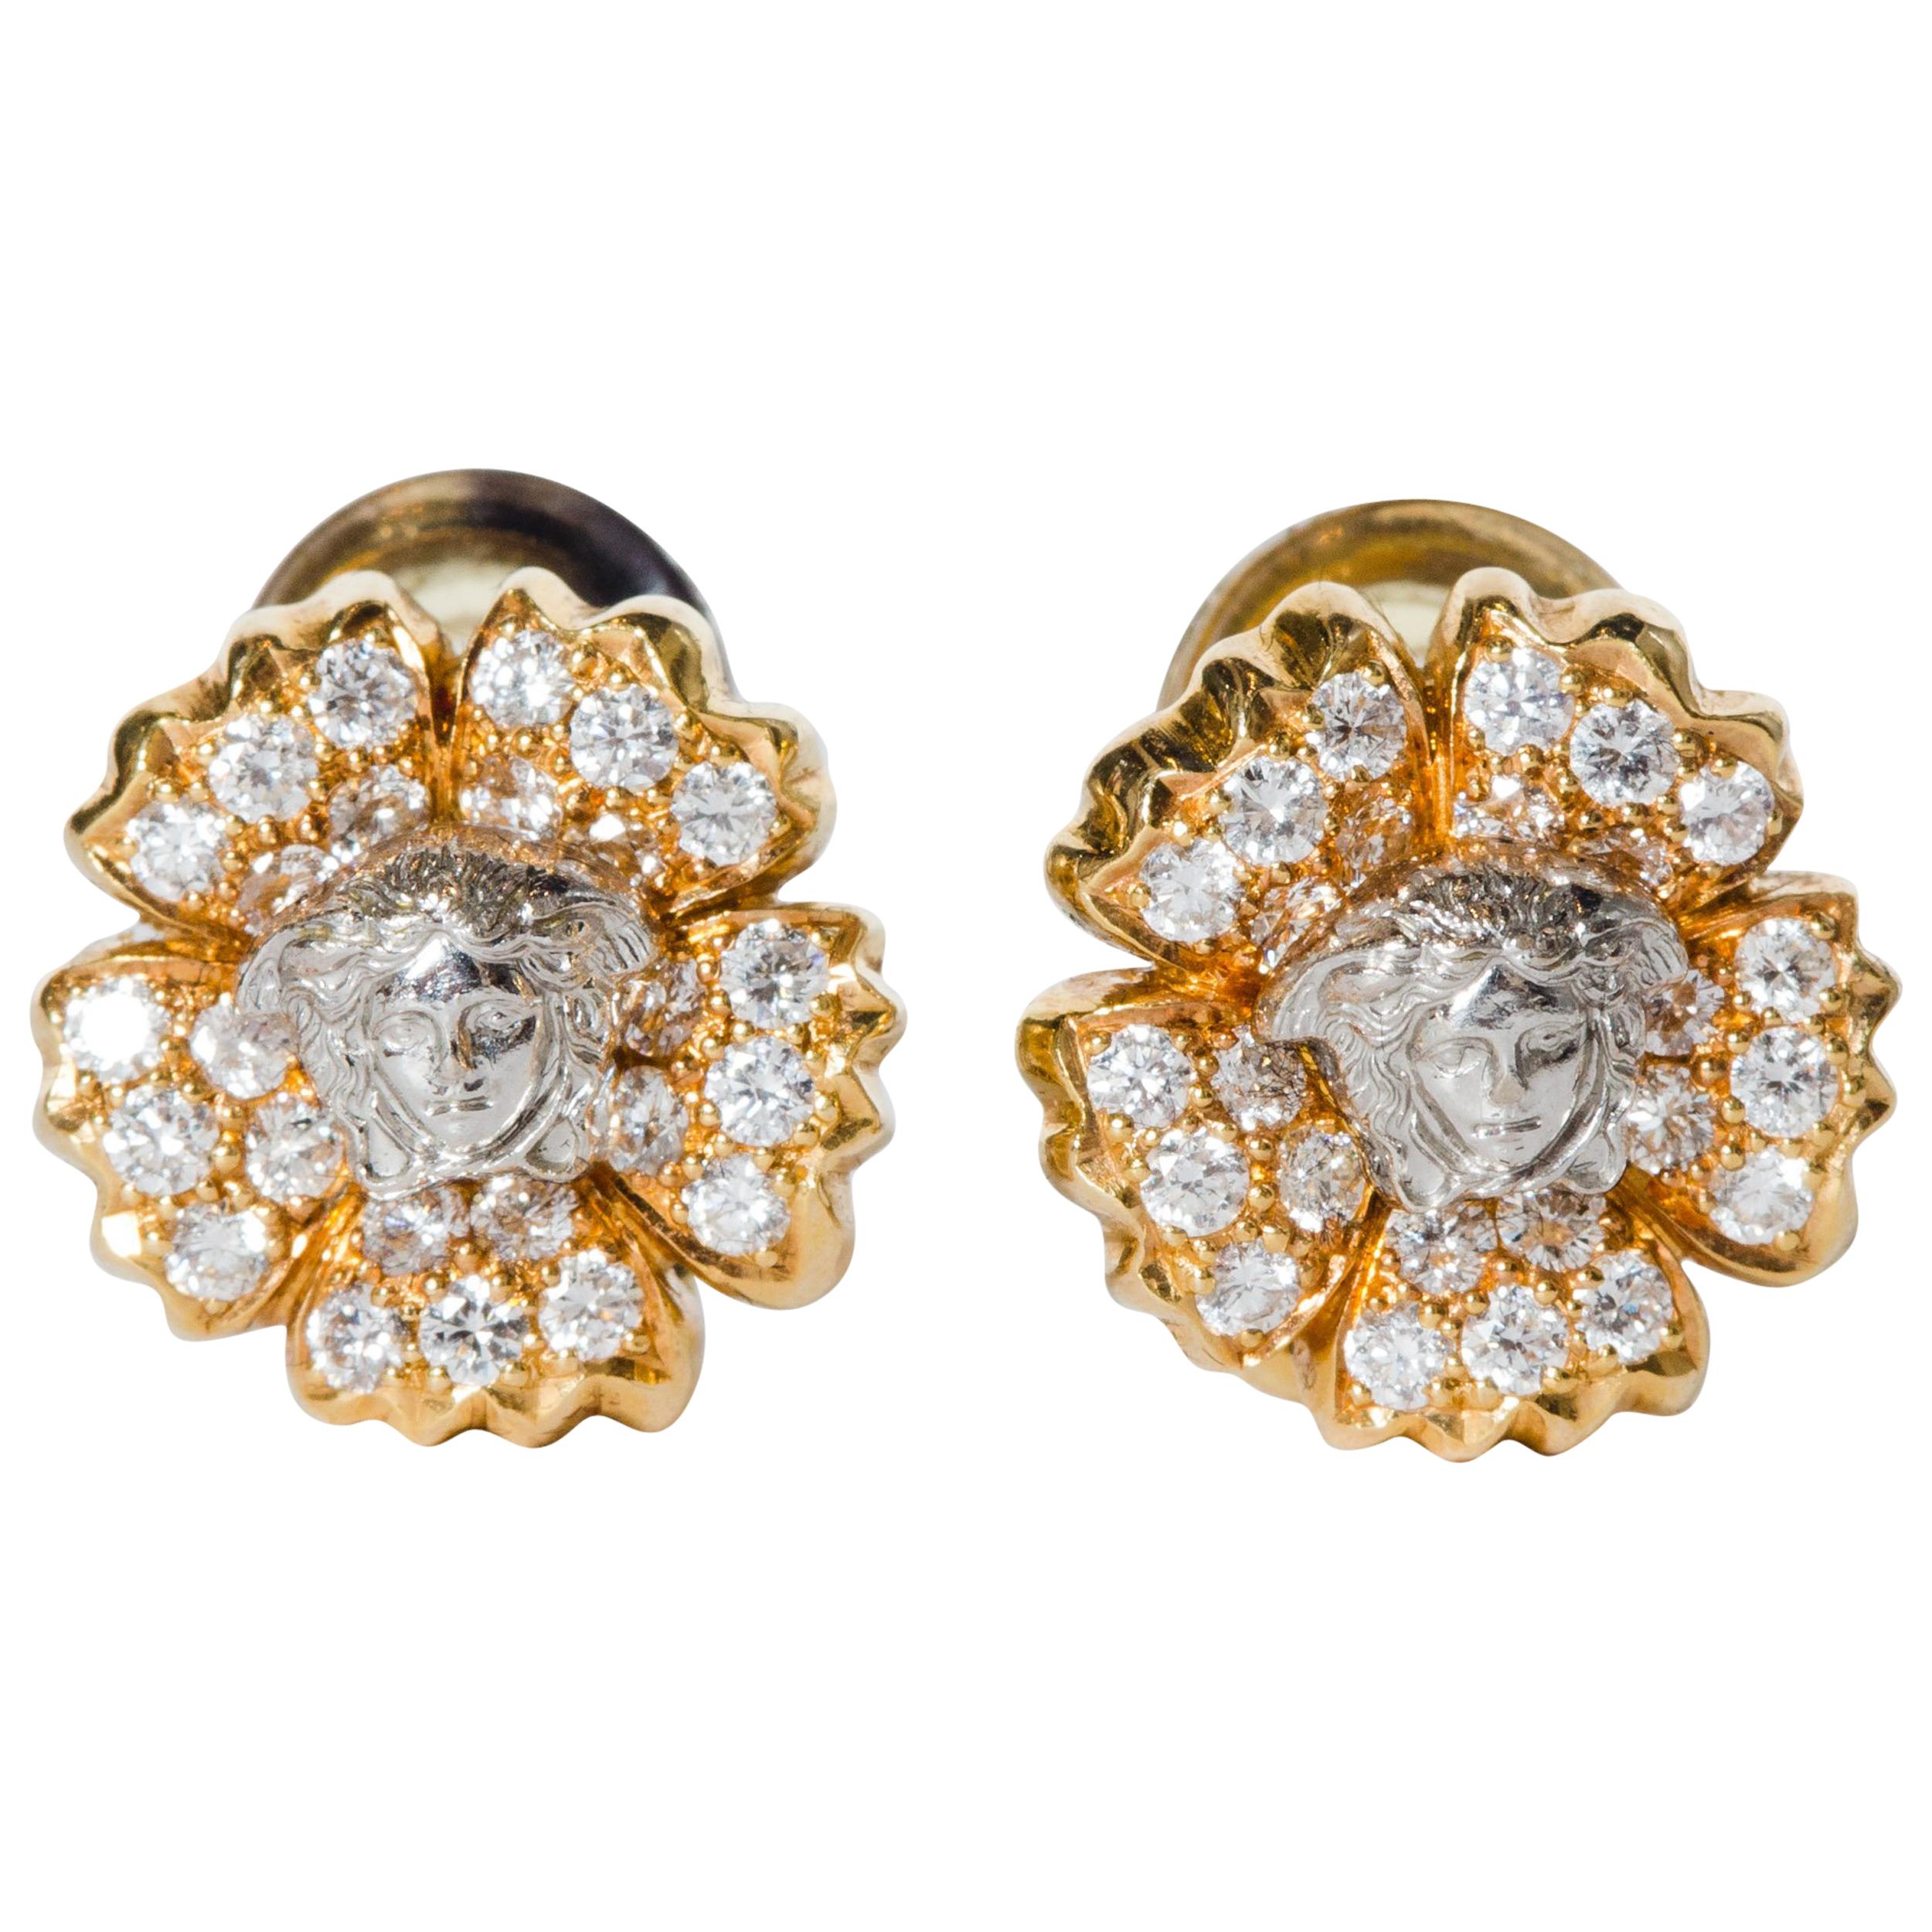 Gianni Versace Vintage Tiara Collection Earrings, 1990S 